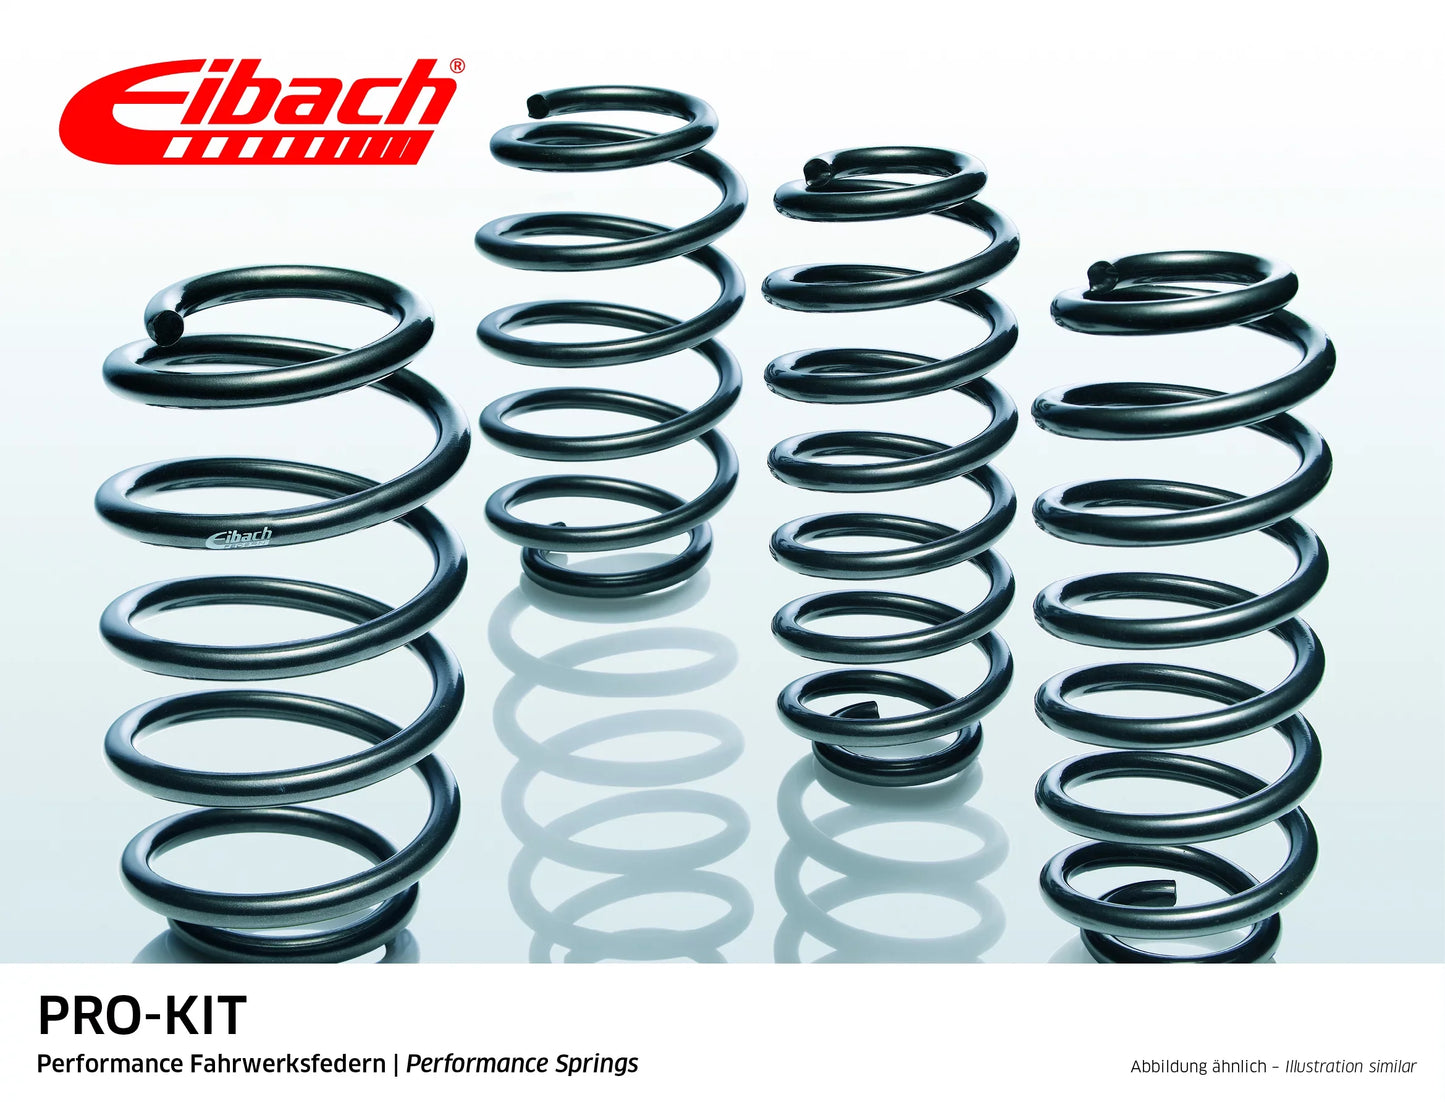 Eibach Pro-Kit Lowering Springs (E10-15-025-01-22) at £351.58